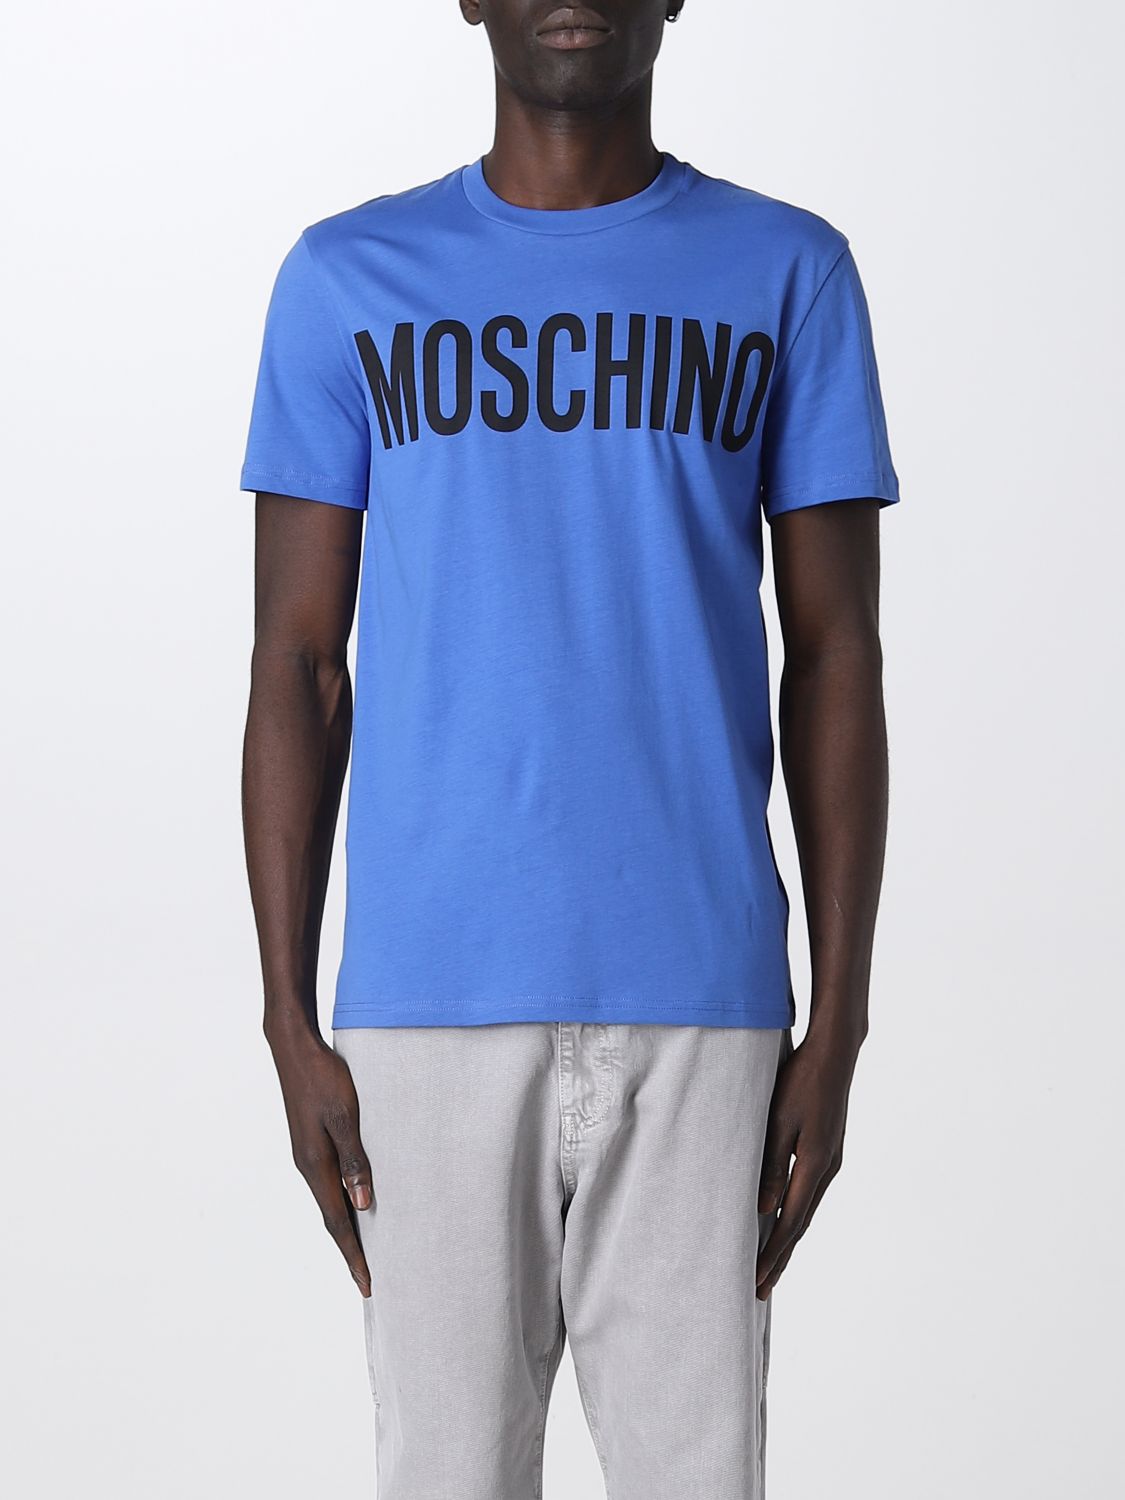 MOSCHINO COUTURE: t-shirt for man - Gnawed Blue | Moschino Couture t ...